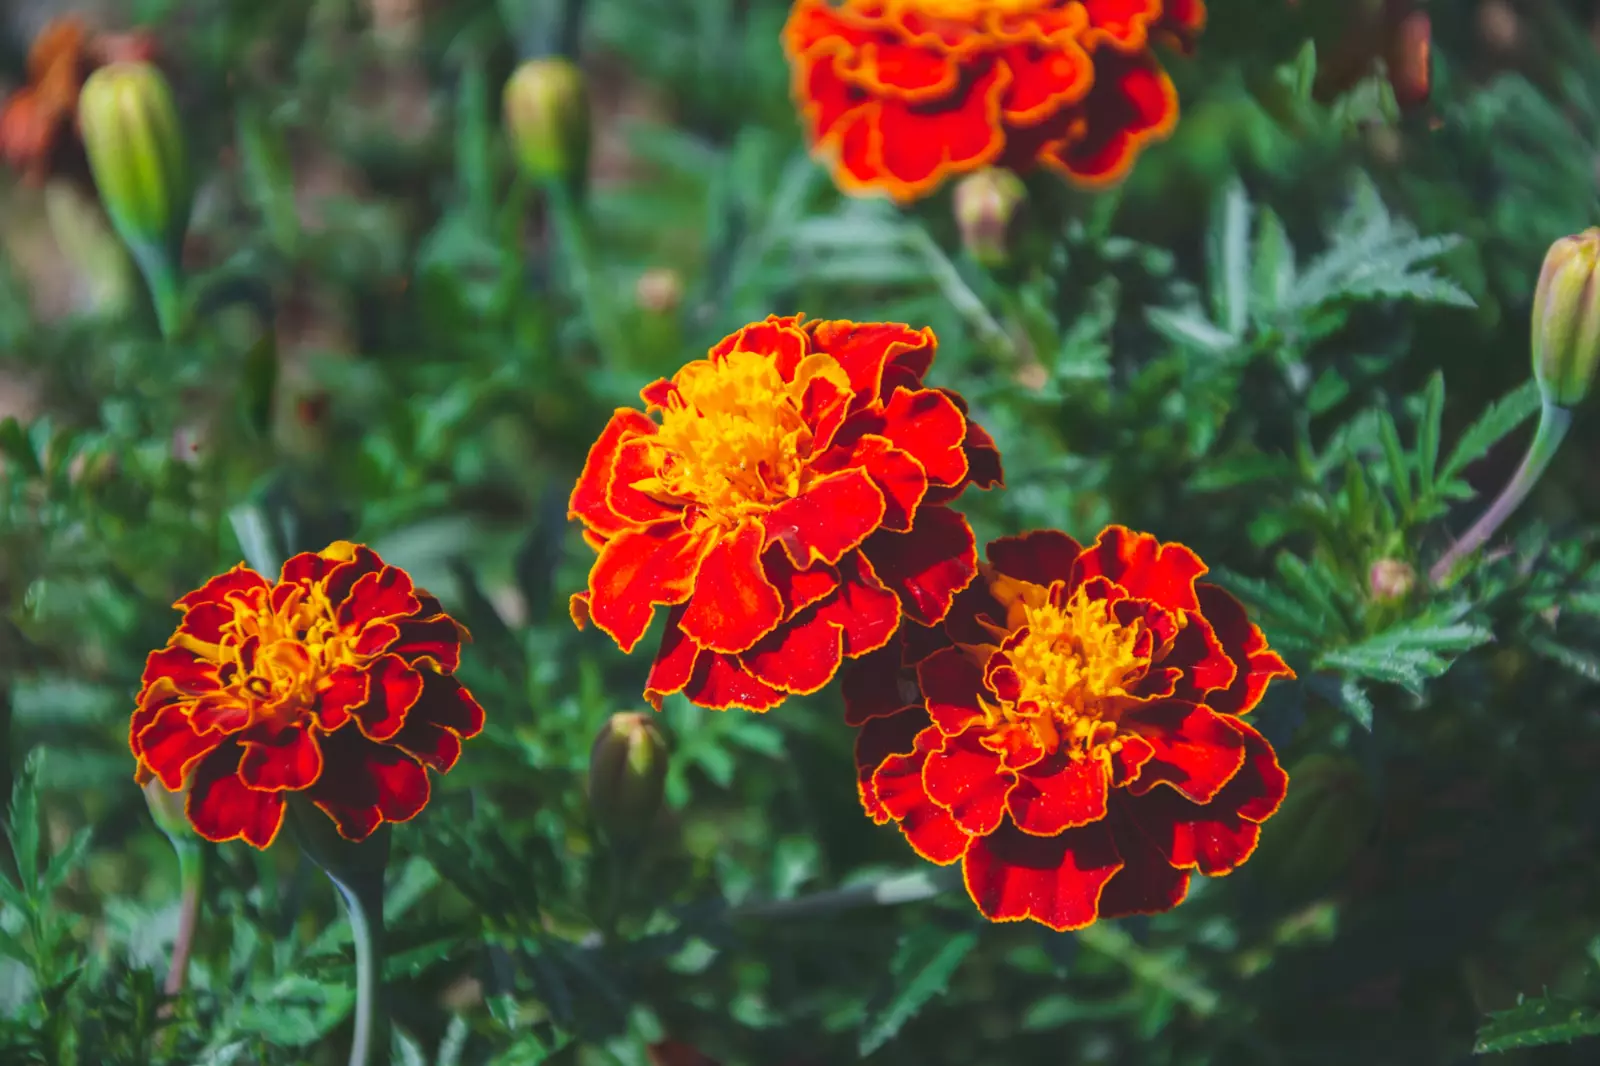 Sparky French Marigold Seeds - Heirloom, Open Pollinated, Non-GMO - $5.98